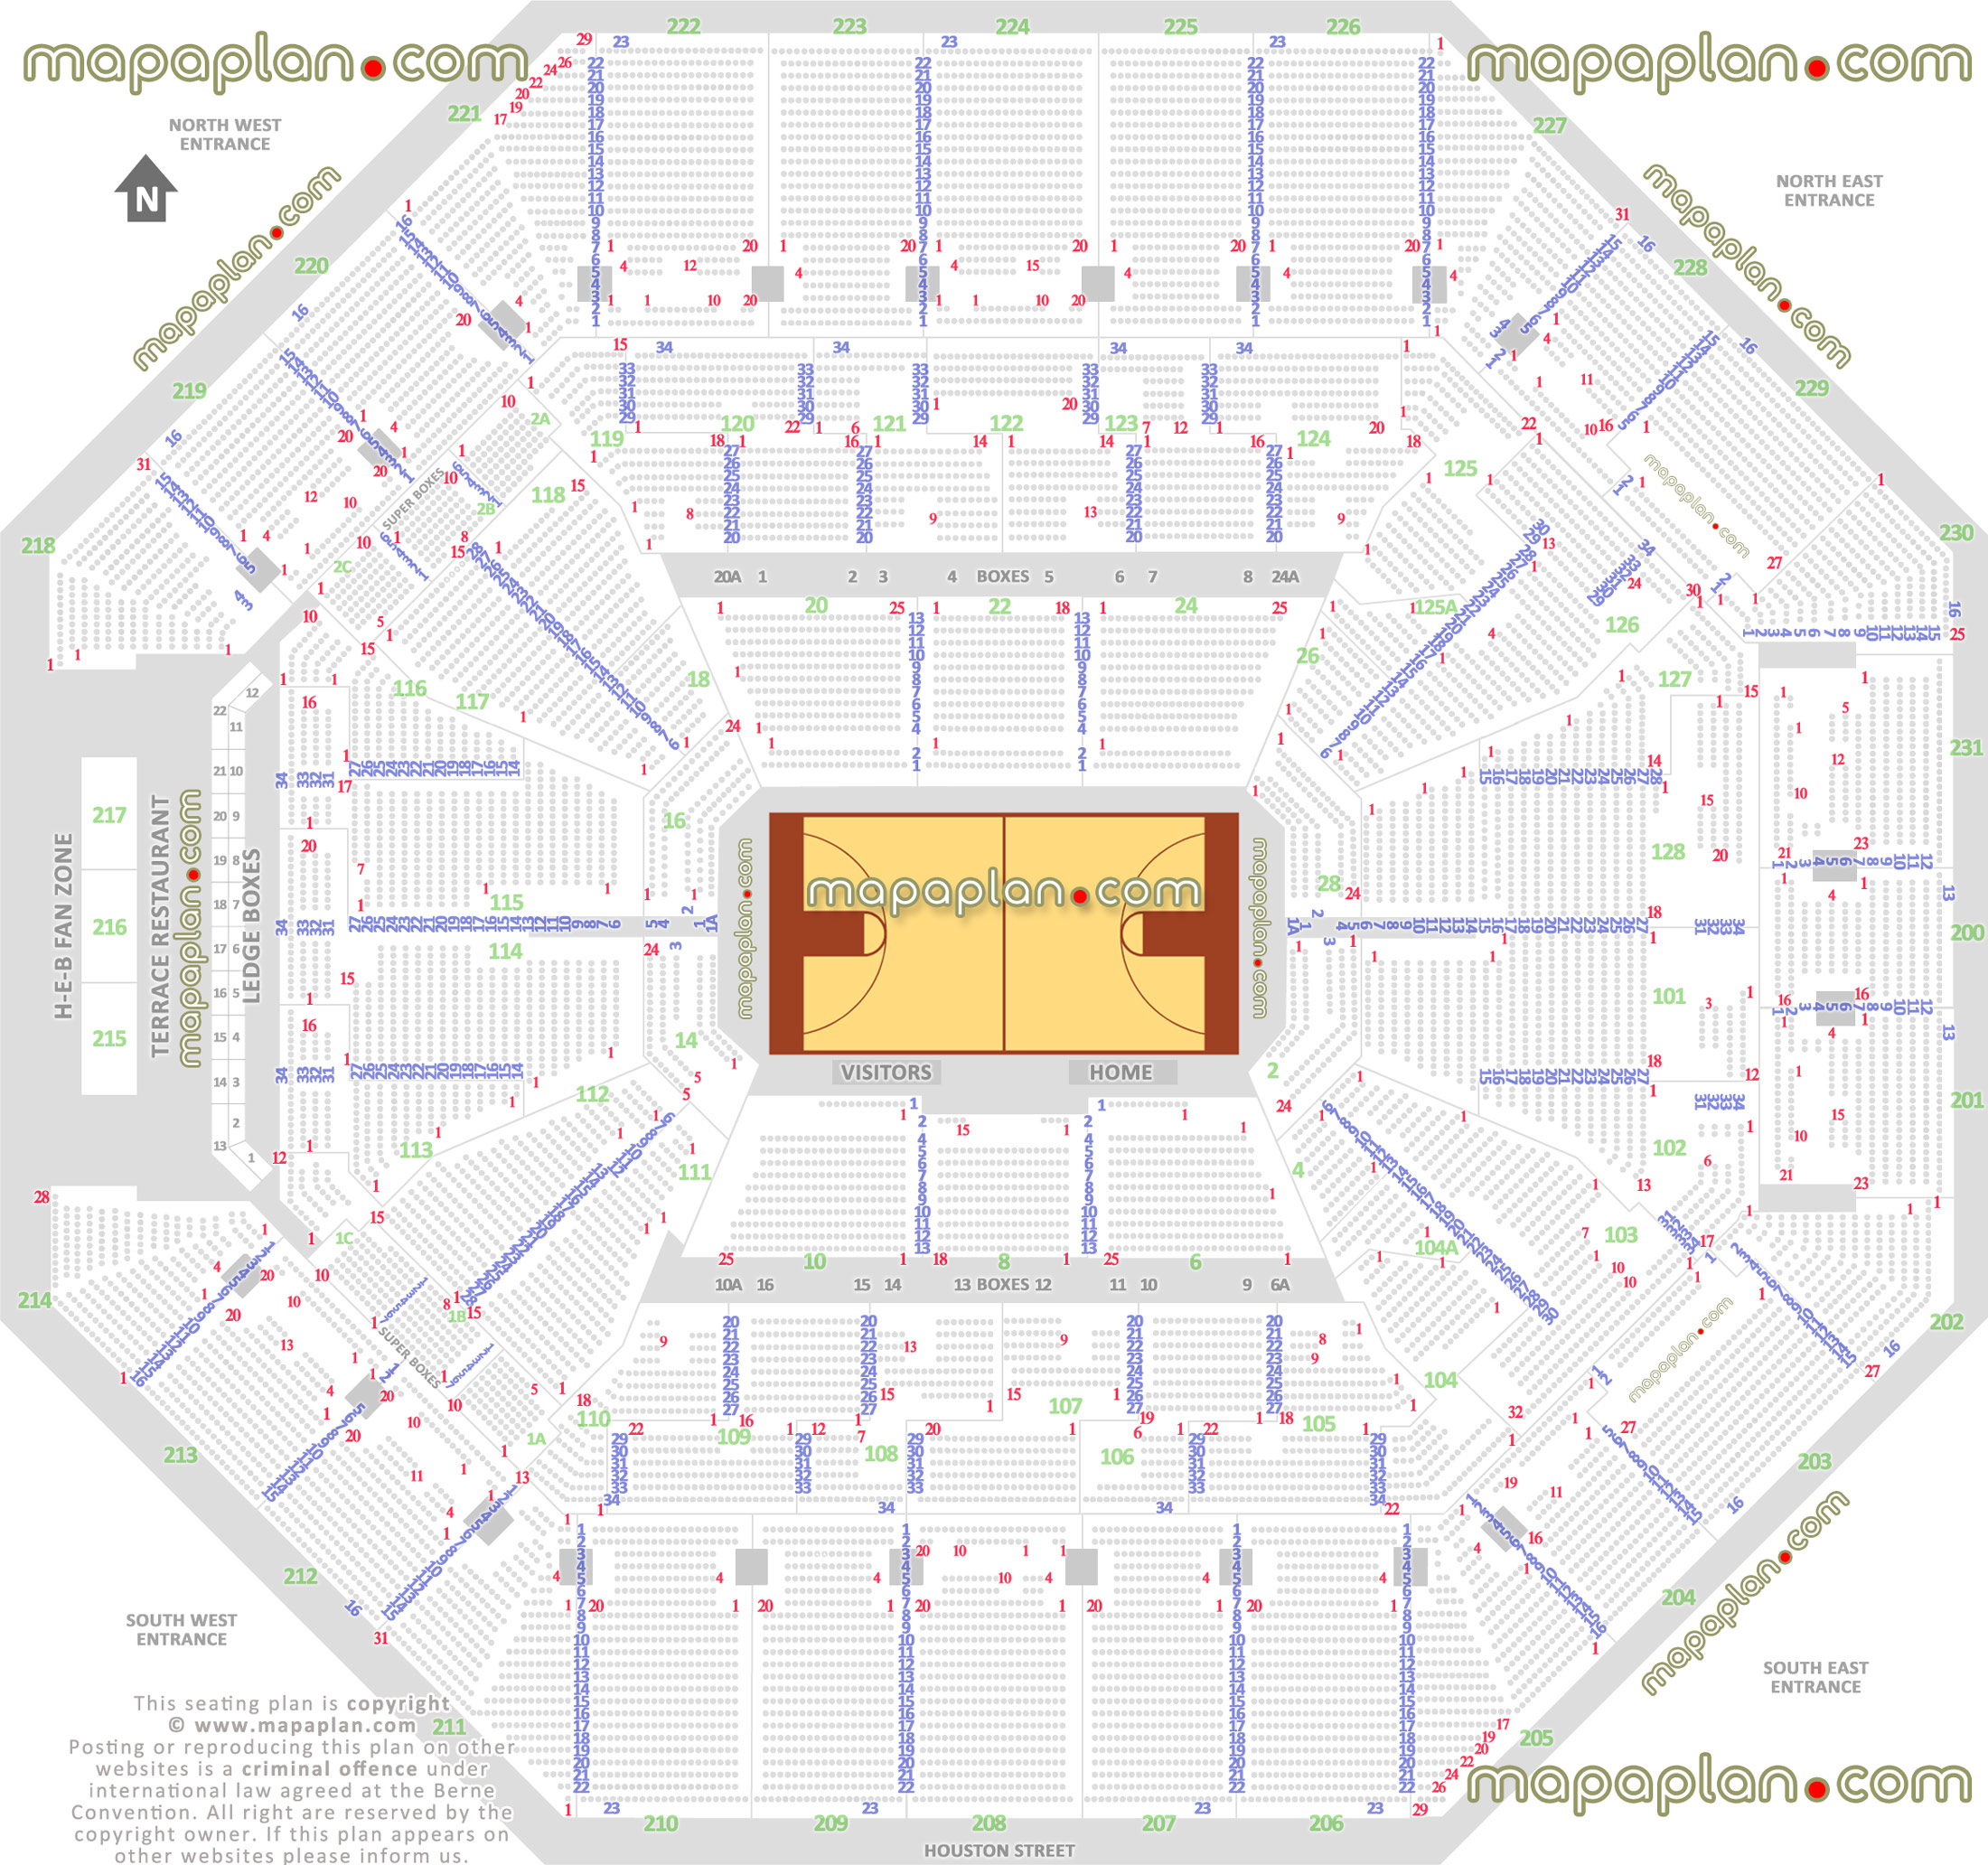 san antonio spurs basketball game arena stadium diagram individual find seat locator how many seats row how seats rows numbered courtside sections 2 4 6 8 10 12 14 16 18 20 22 24 26 28 San Antonio ATT Center seating chart